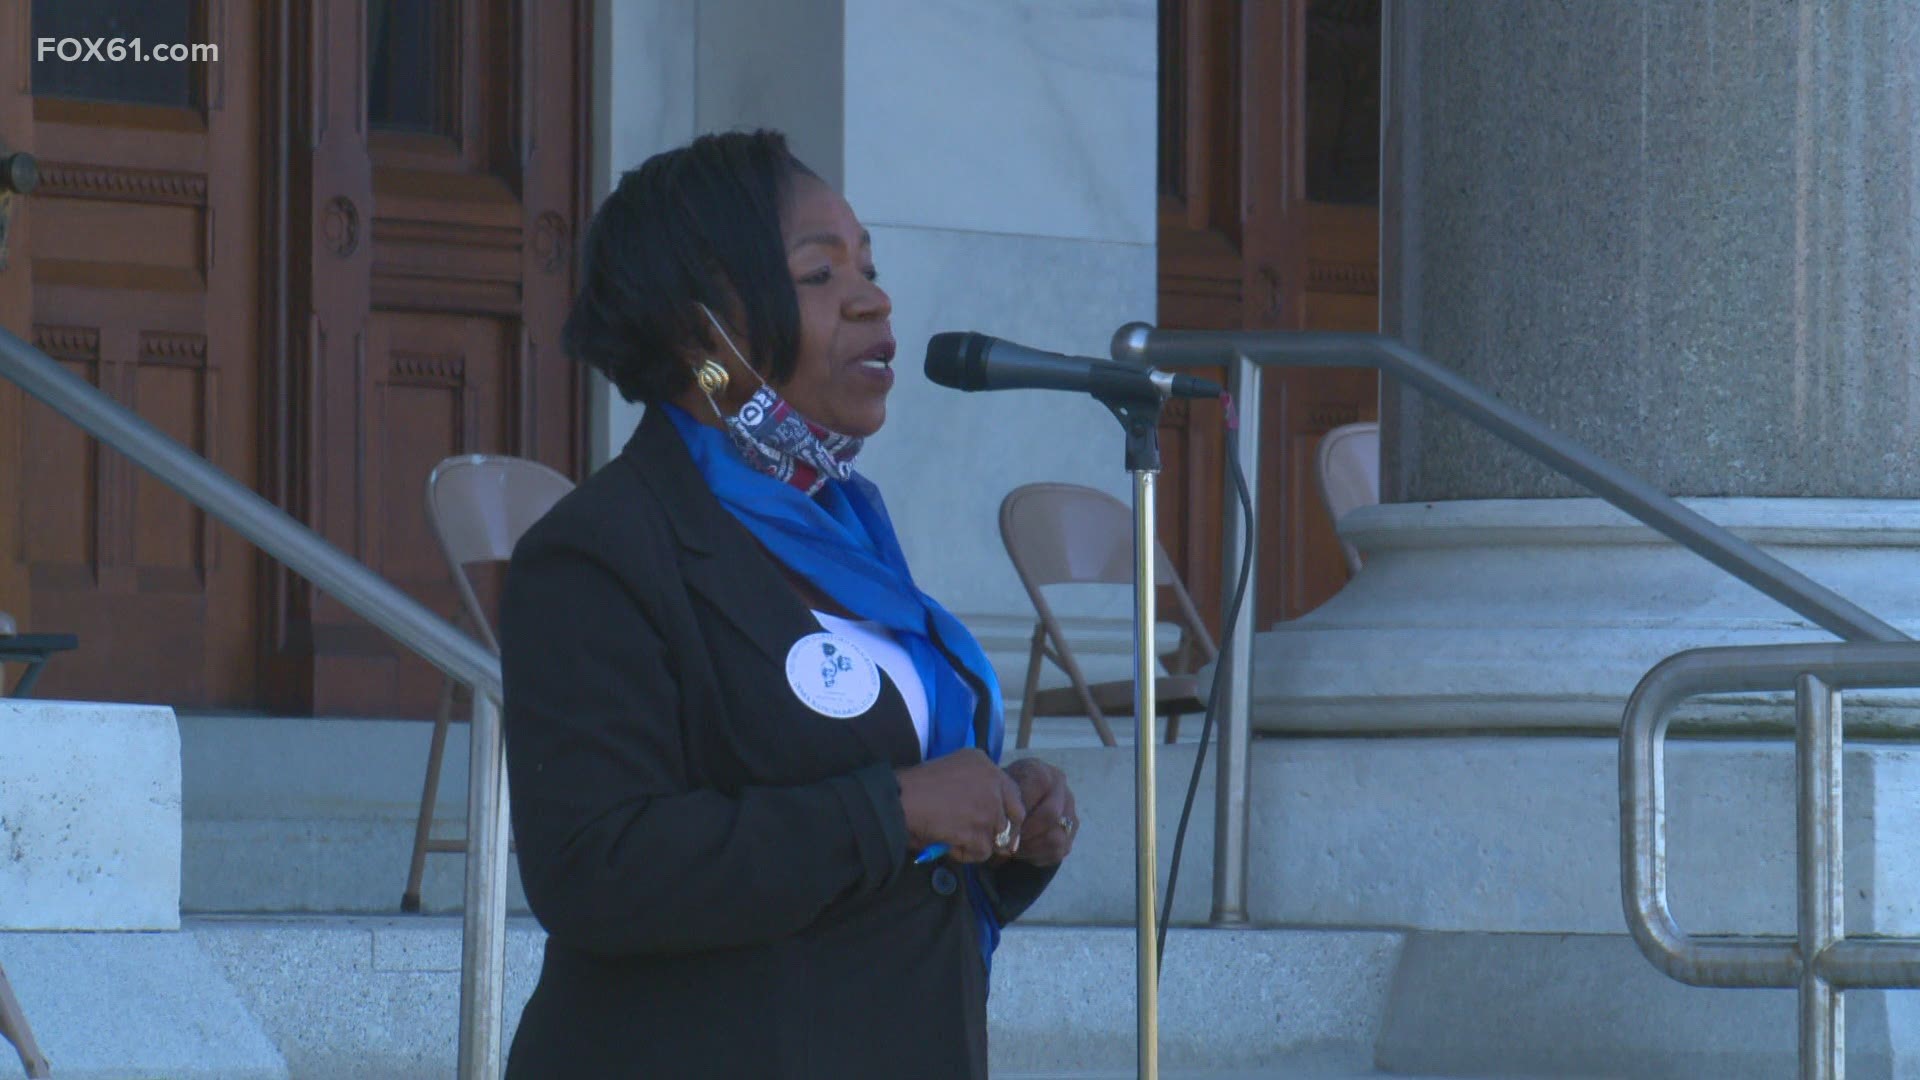 Women gathered at the state capitol for a rally about "breaking the glass ceiling" in politics, and reflected on RGB's role in that process.